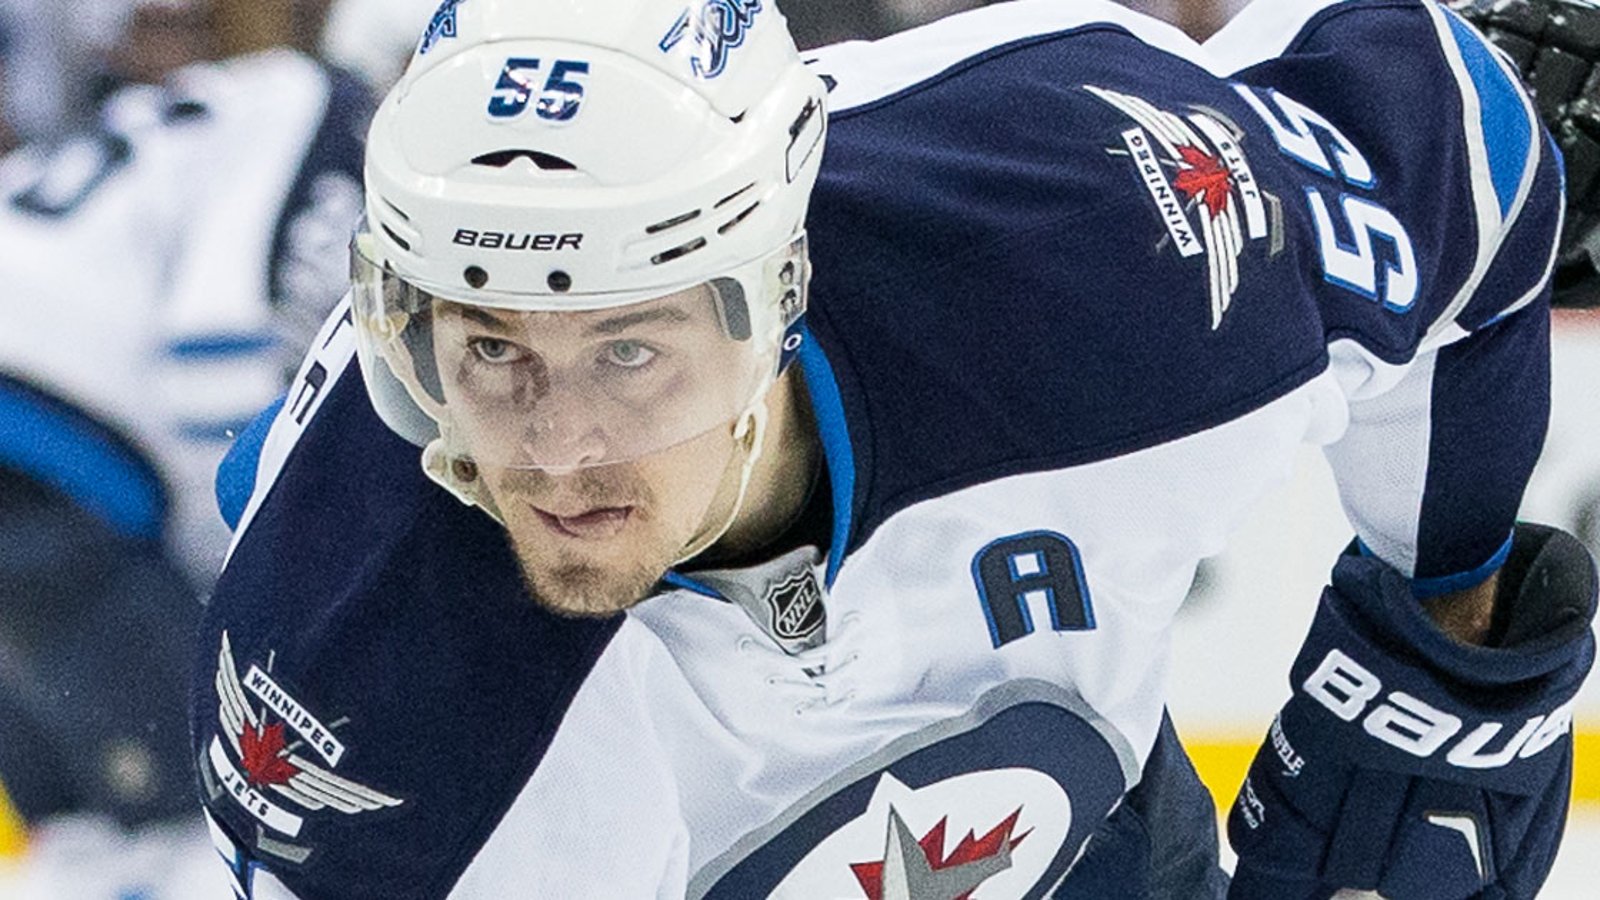 Report: Scheifele set up for failure in 2017-18